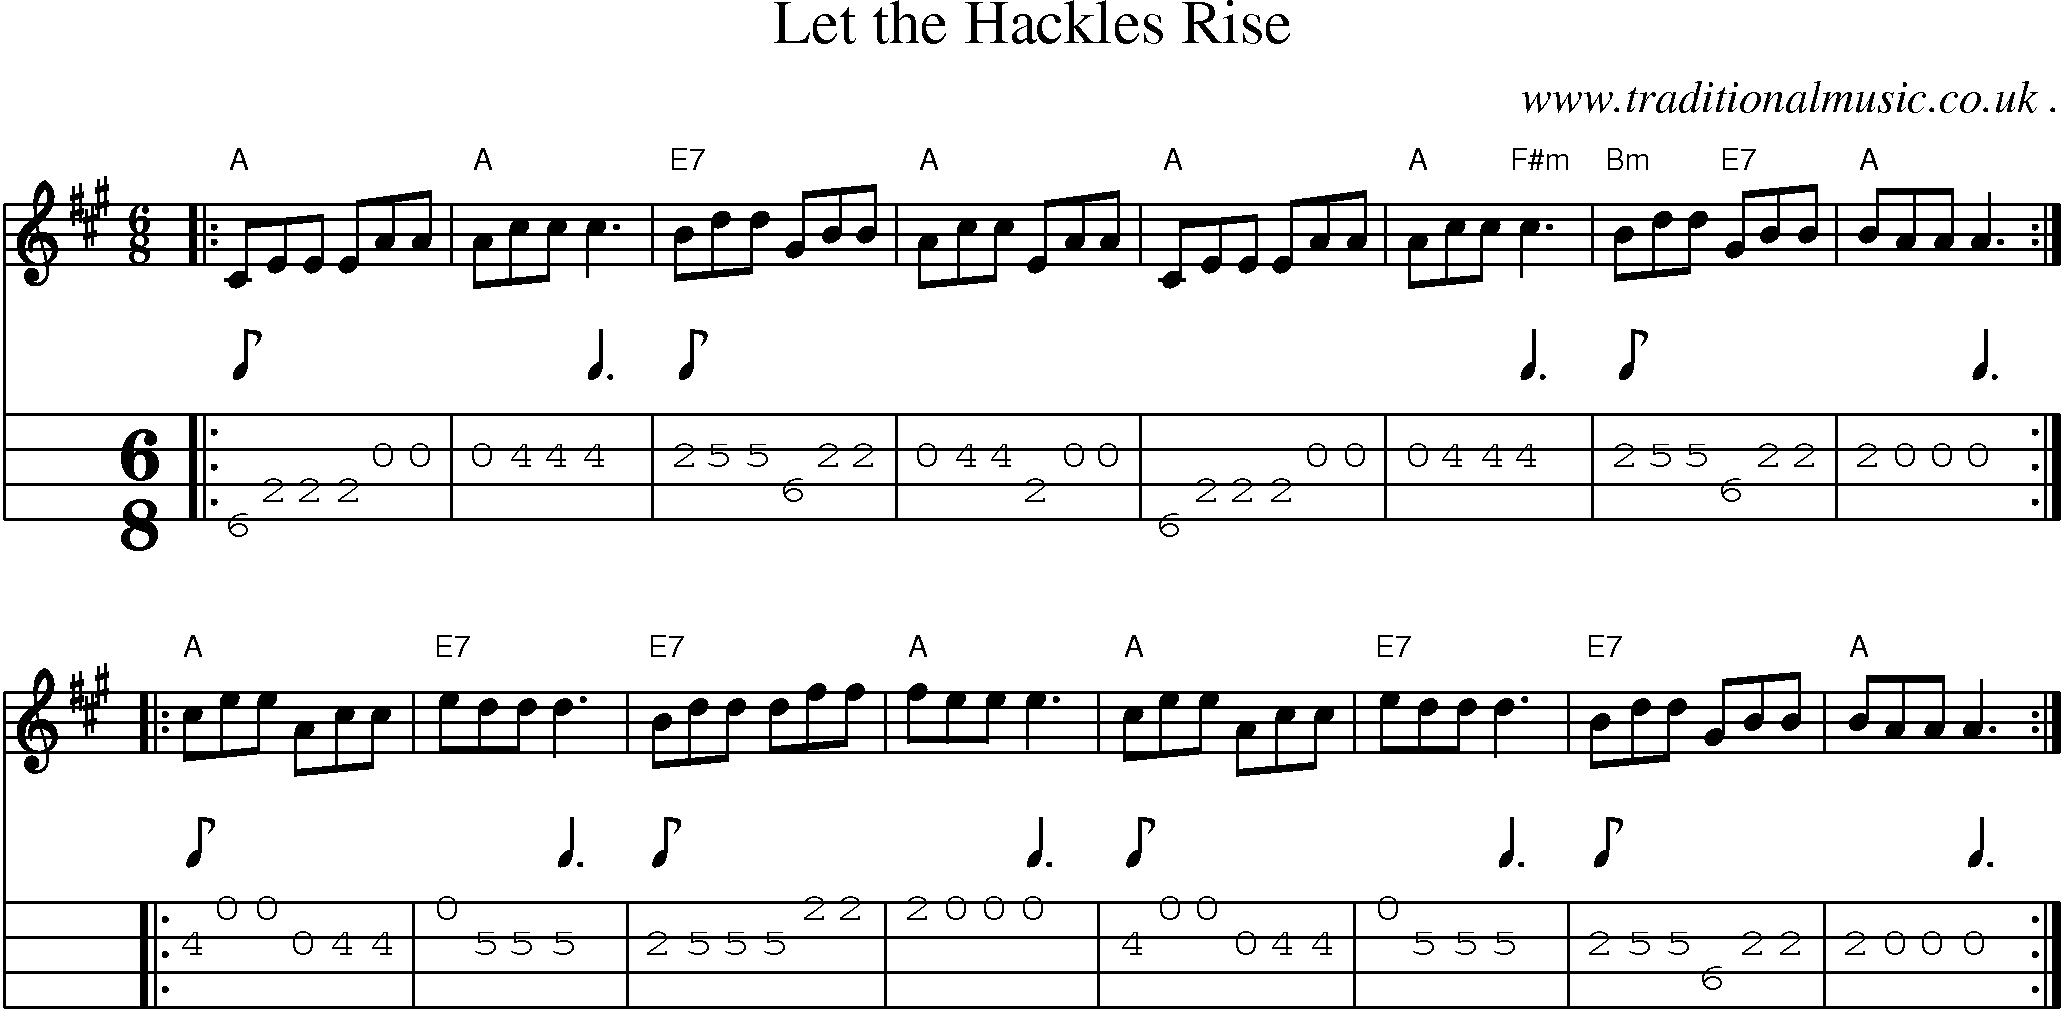 Sheet-music  score, Chords and Mandolin Tabs for Let The Hackles Rise